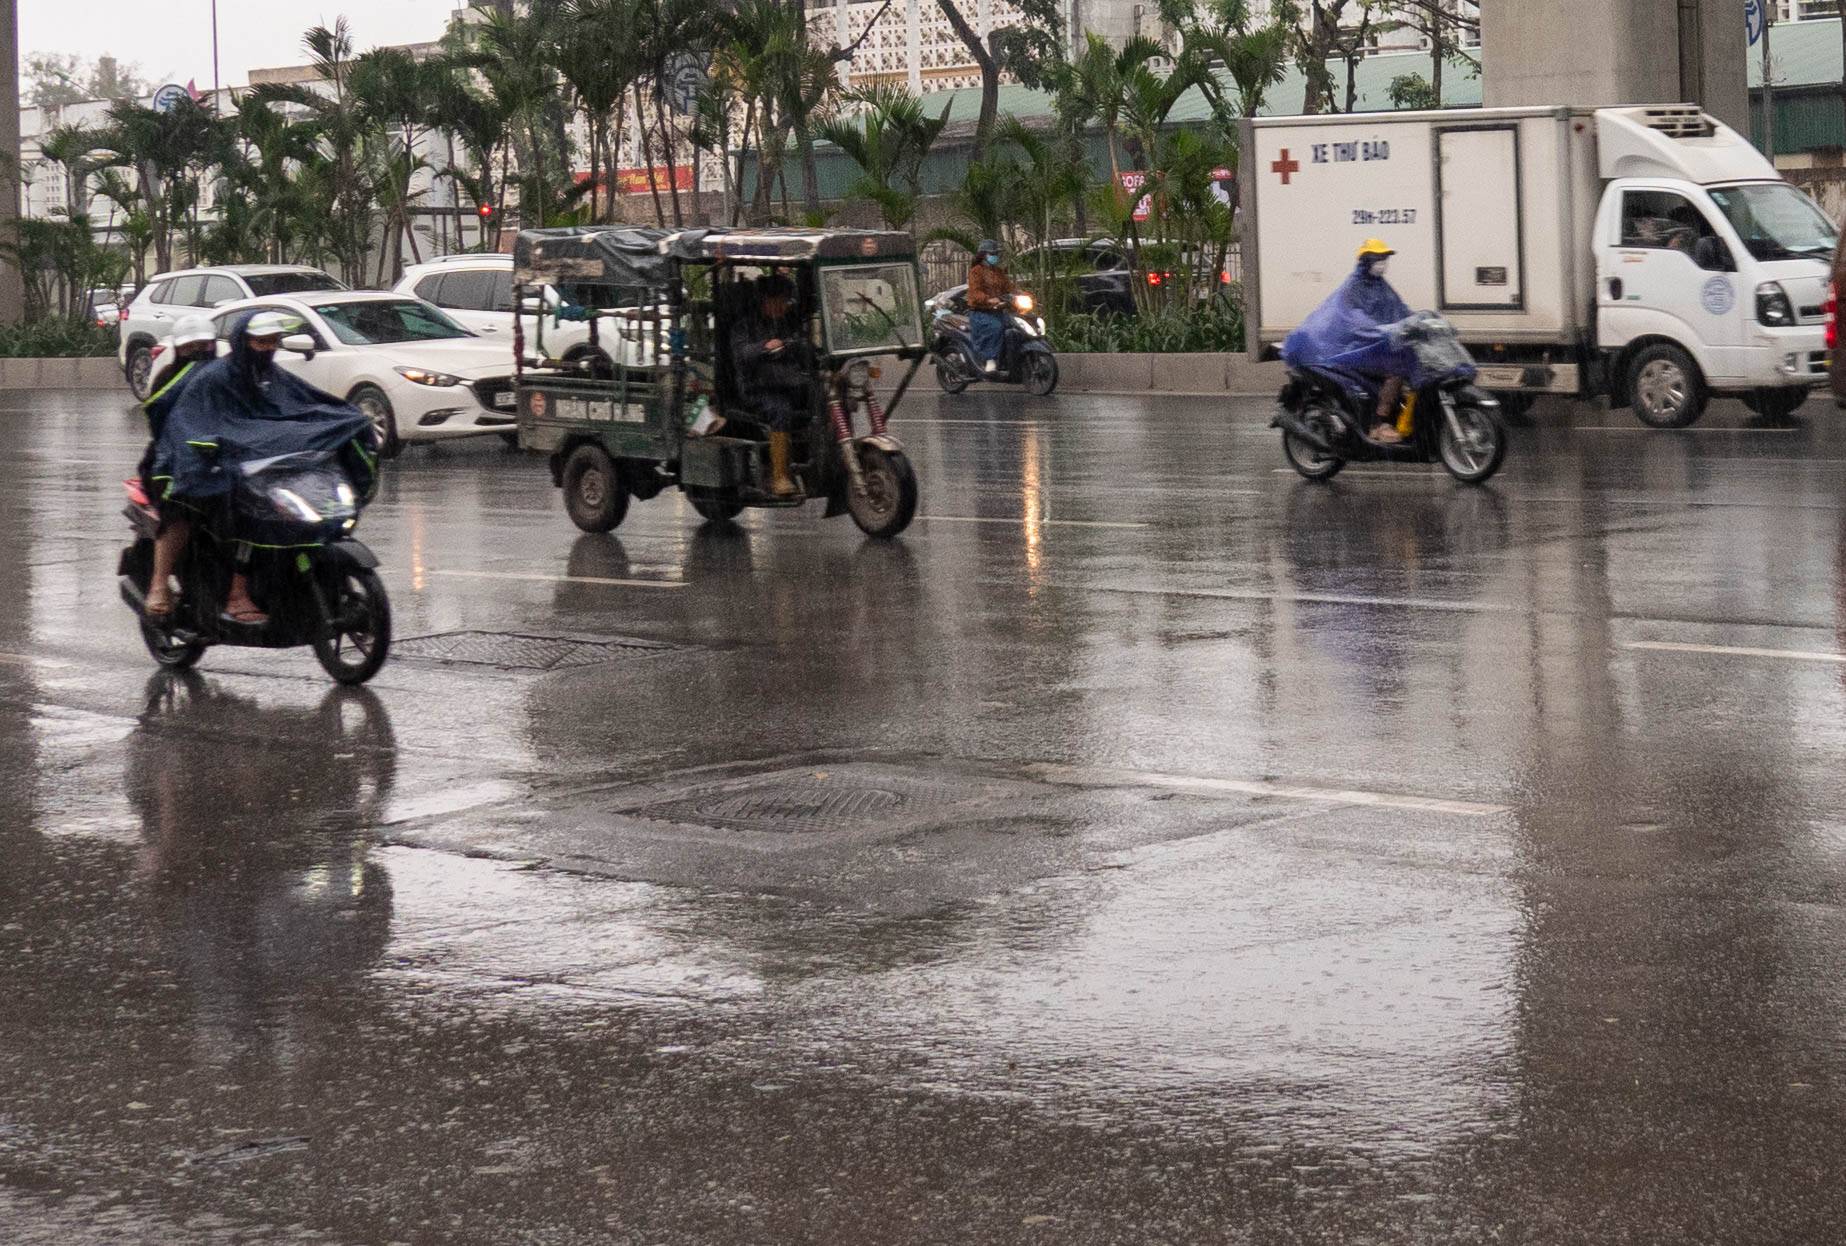 Picture of motorbikes, cars, and a three wheel vehicle on a rainy day